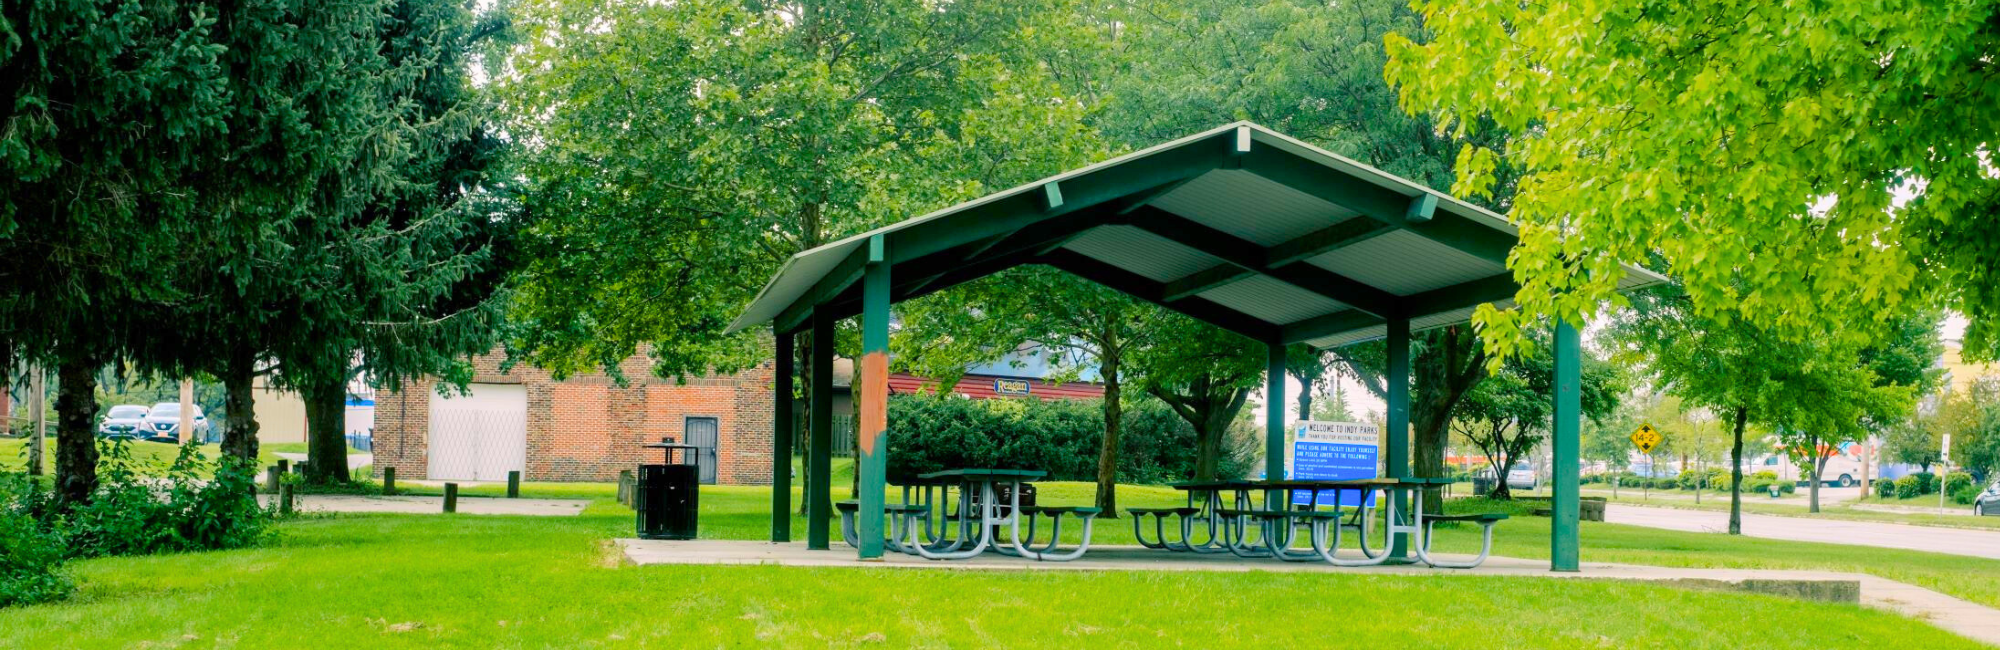 Park with a picnic shelter